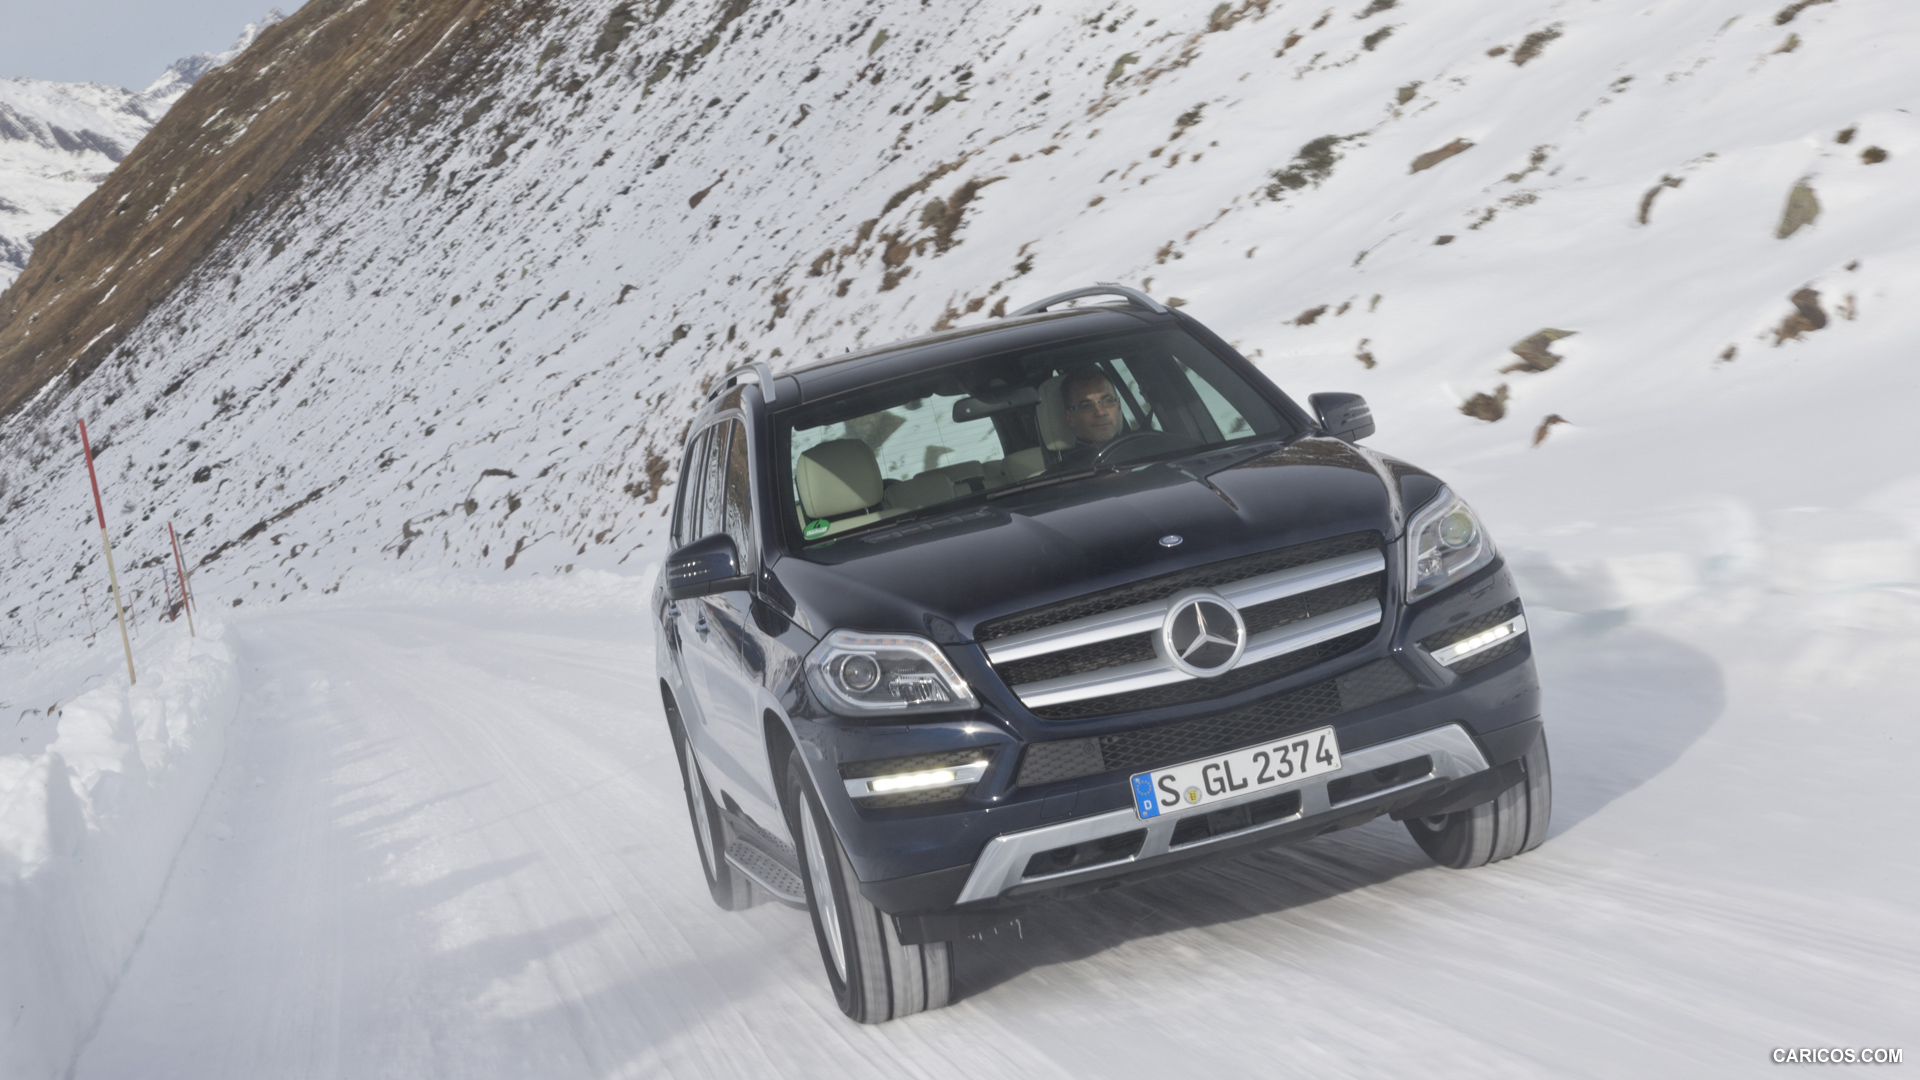 2013 Mercedes-Benz GL 500 4MATIC on Snow - Front, #227 of 259